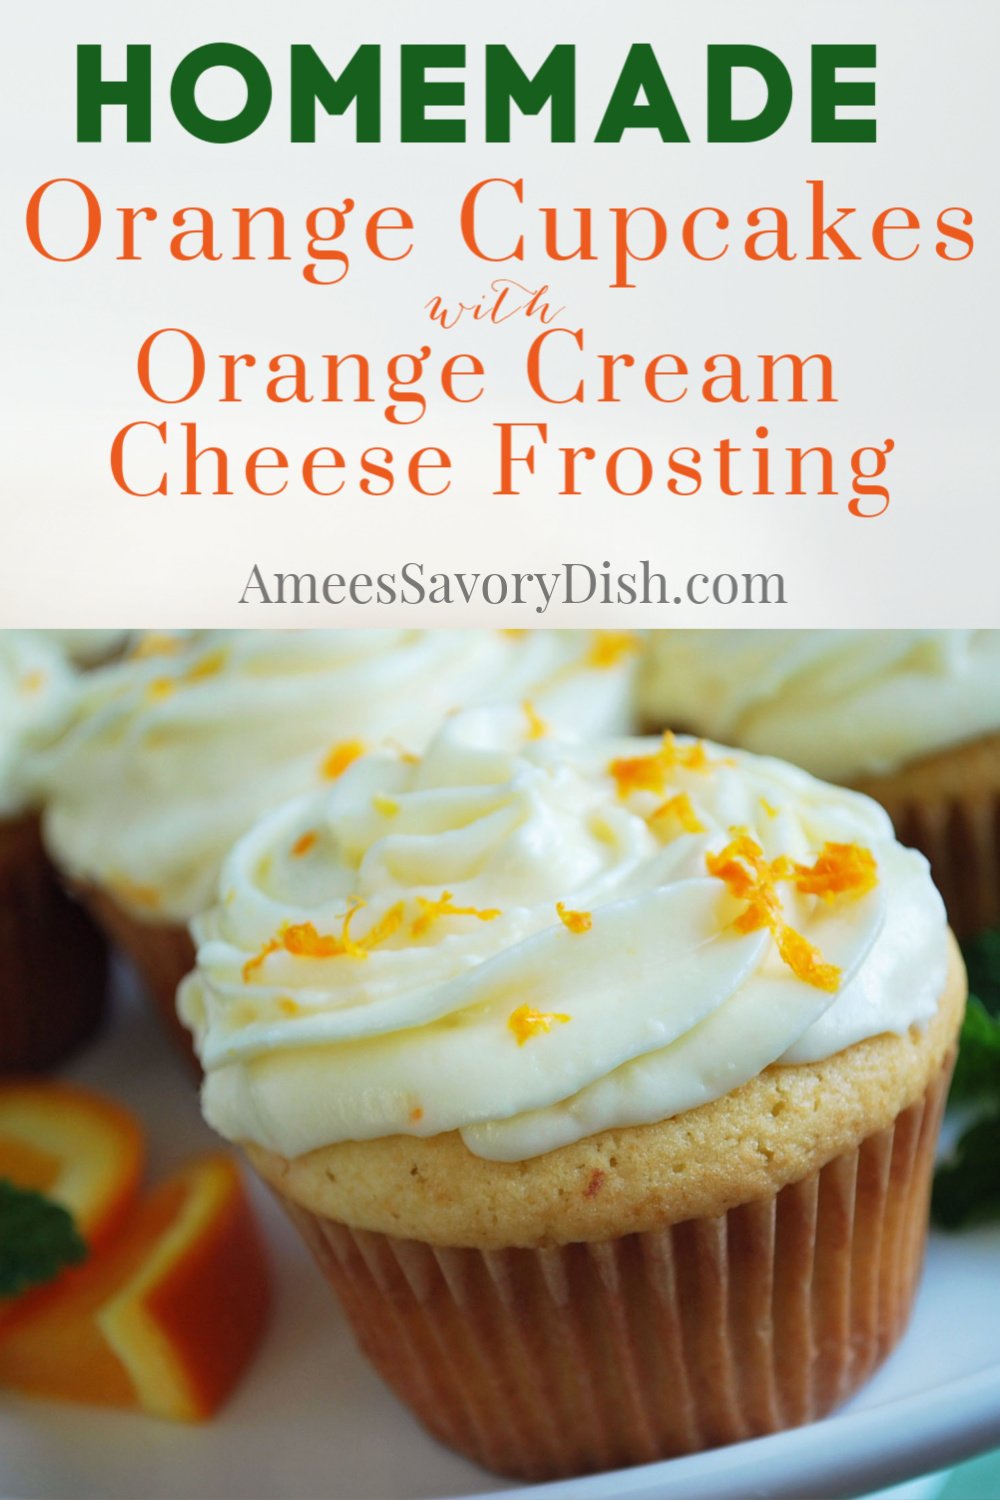 Orange cupcakes made with orange zest and freshly squeezed juice are as delicious as they are pretty to serve. These homemade cupcakes are simple to make and loaded with amazing citrus flavor!  #cupcakes #cupcakerecipe #orangecupcakes #creamcheesefrosting #citrusdesserts via @Ameessavorydish